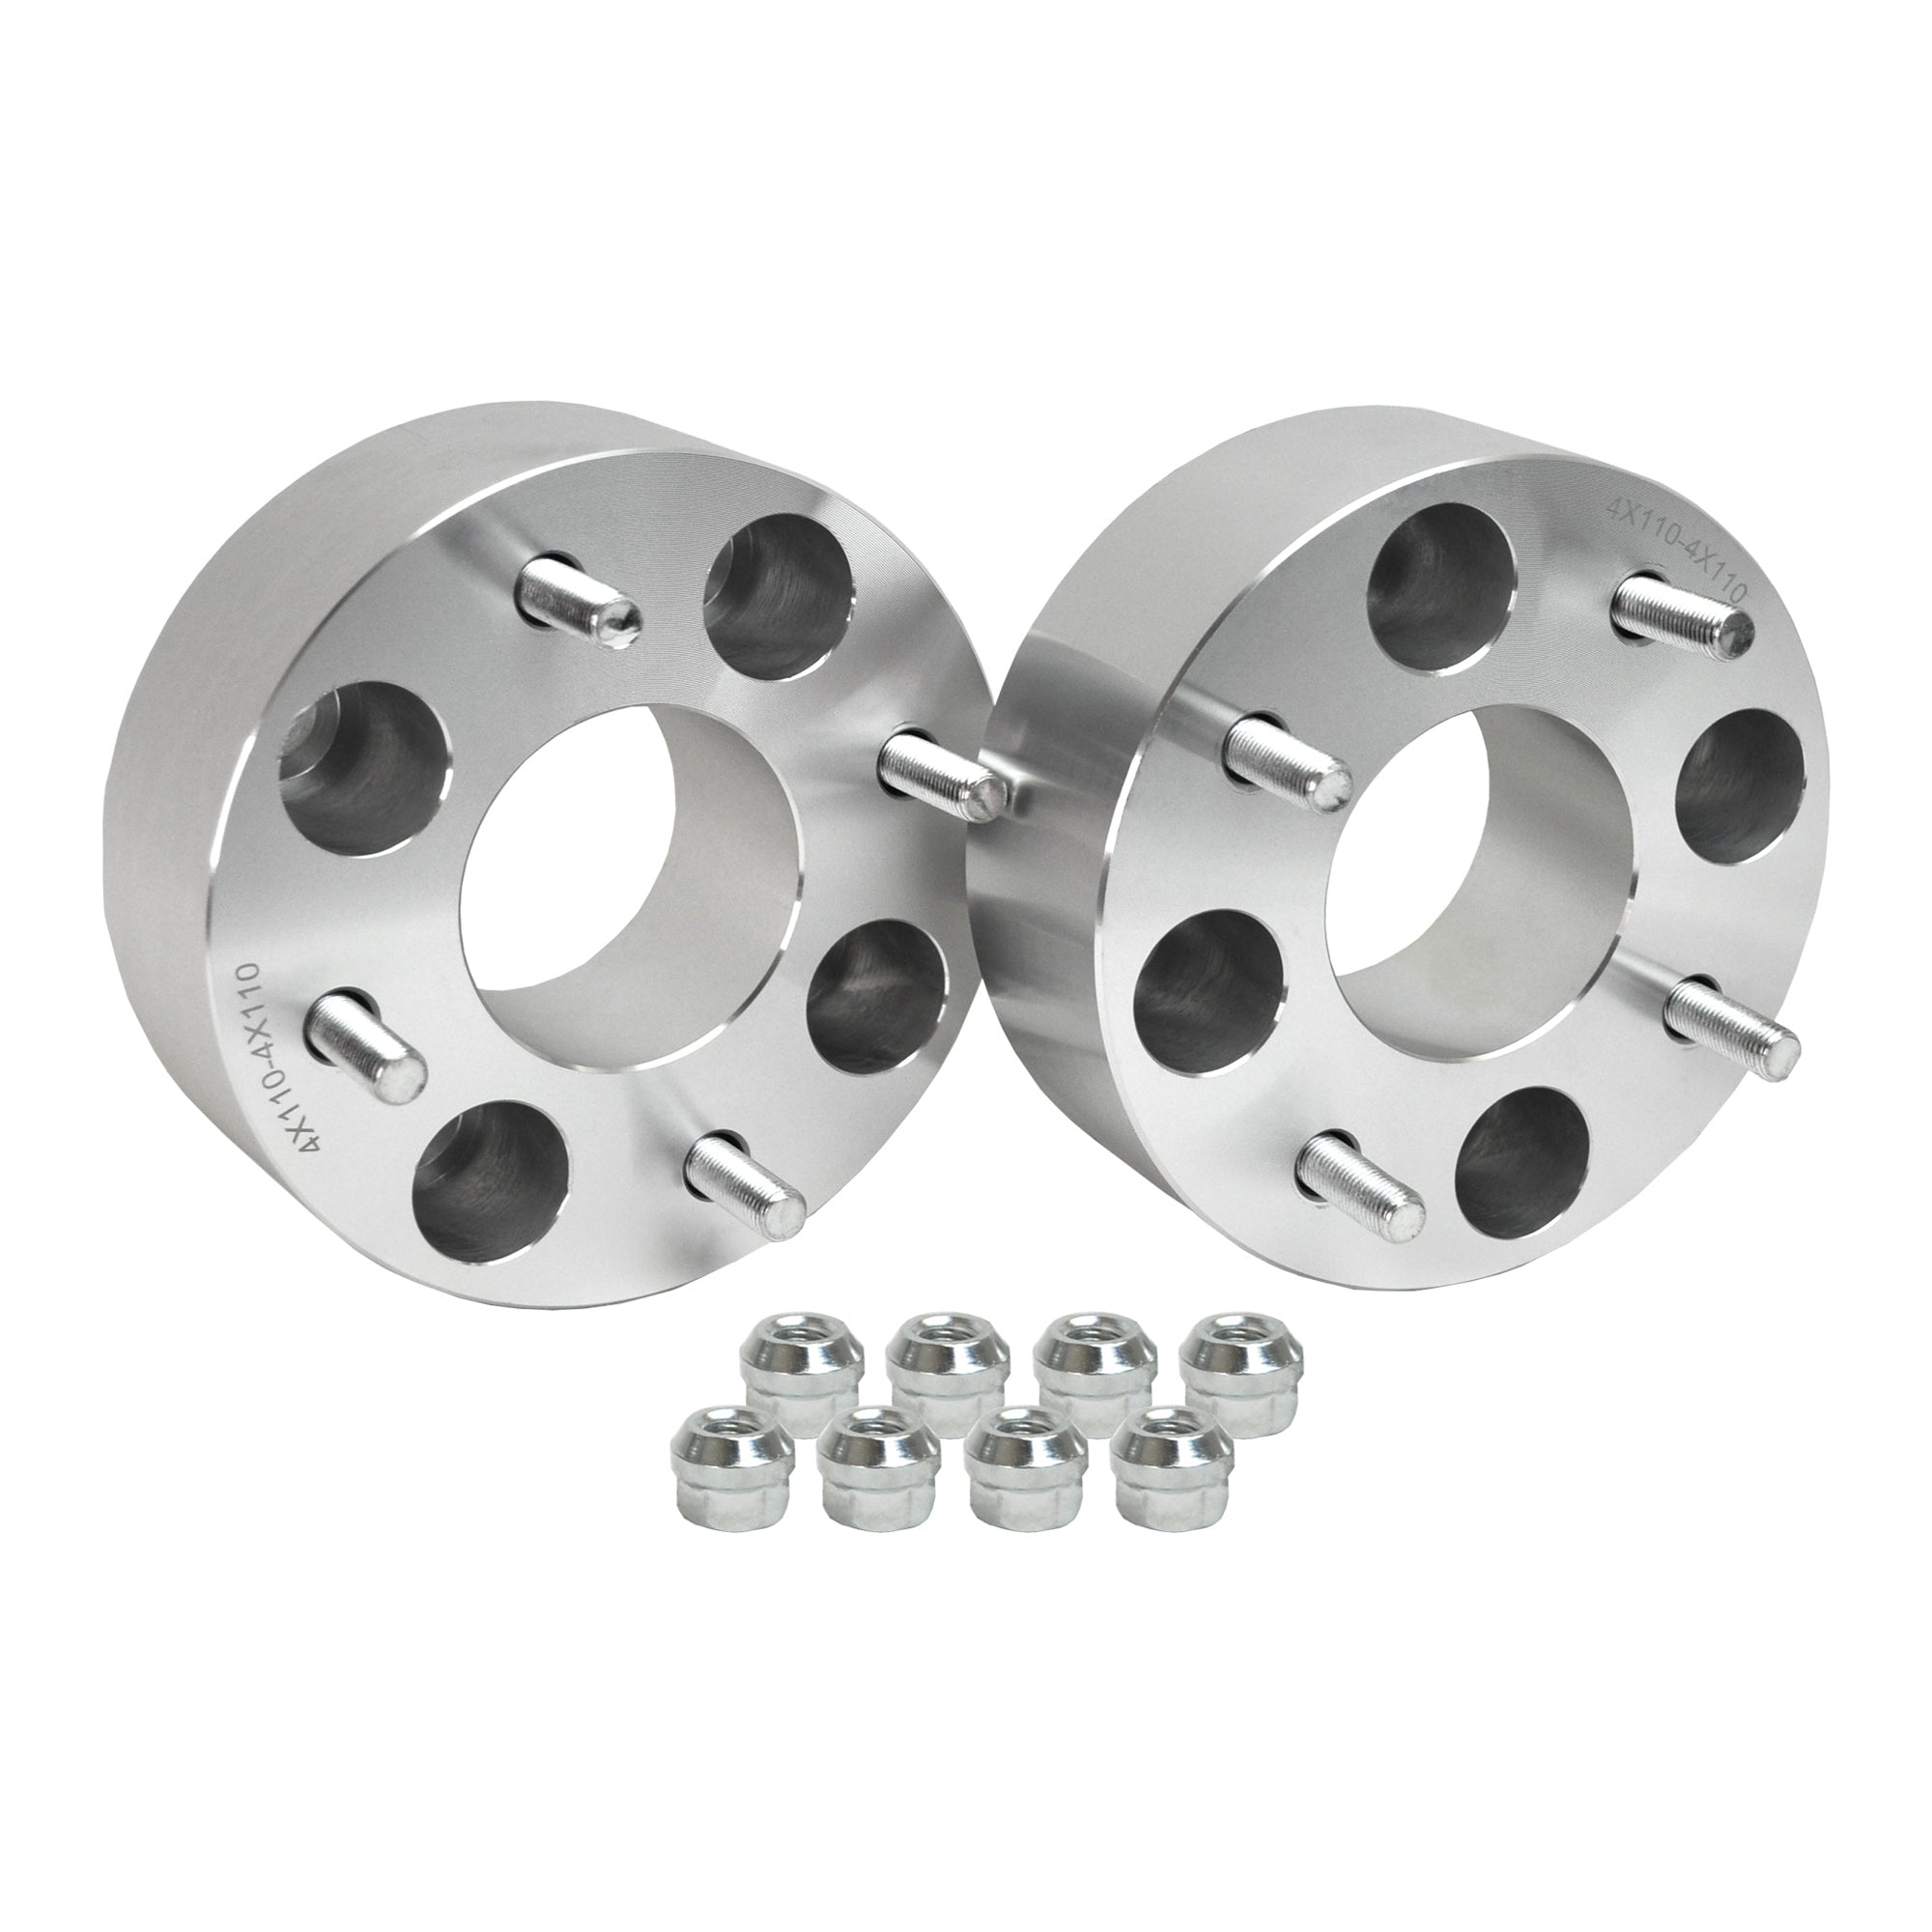 Wheel Spacer for Yamaha Grizzly 660 